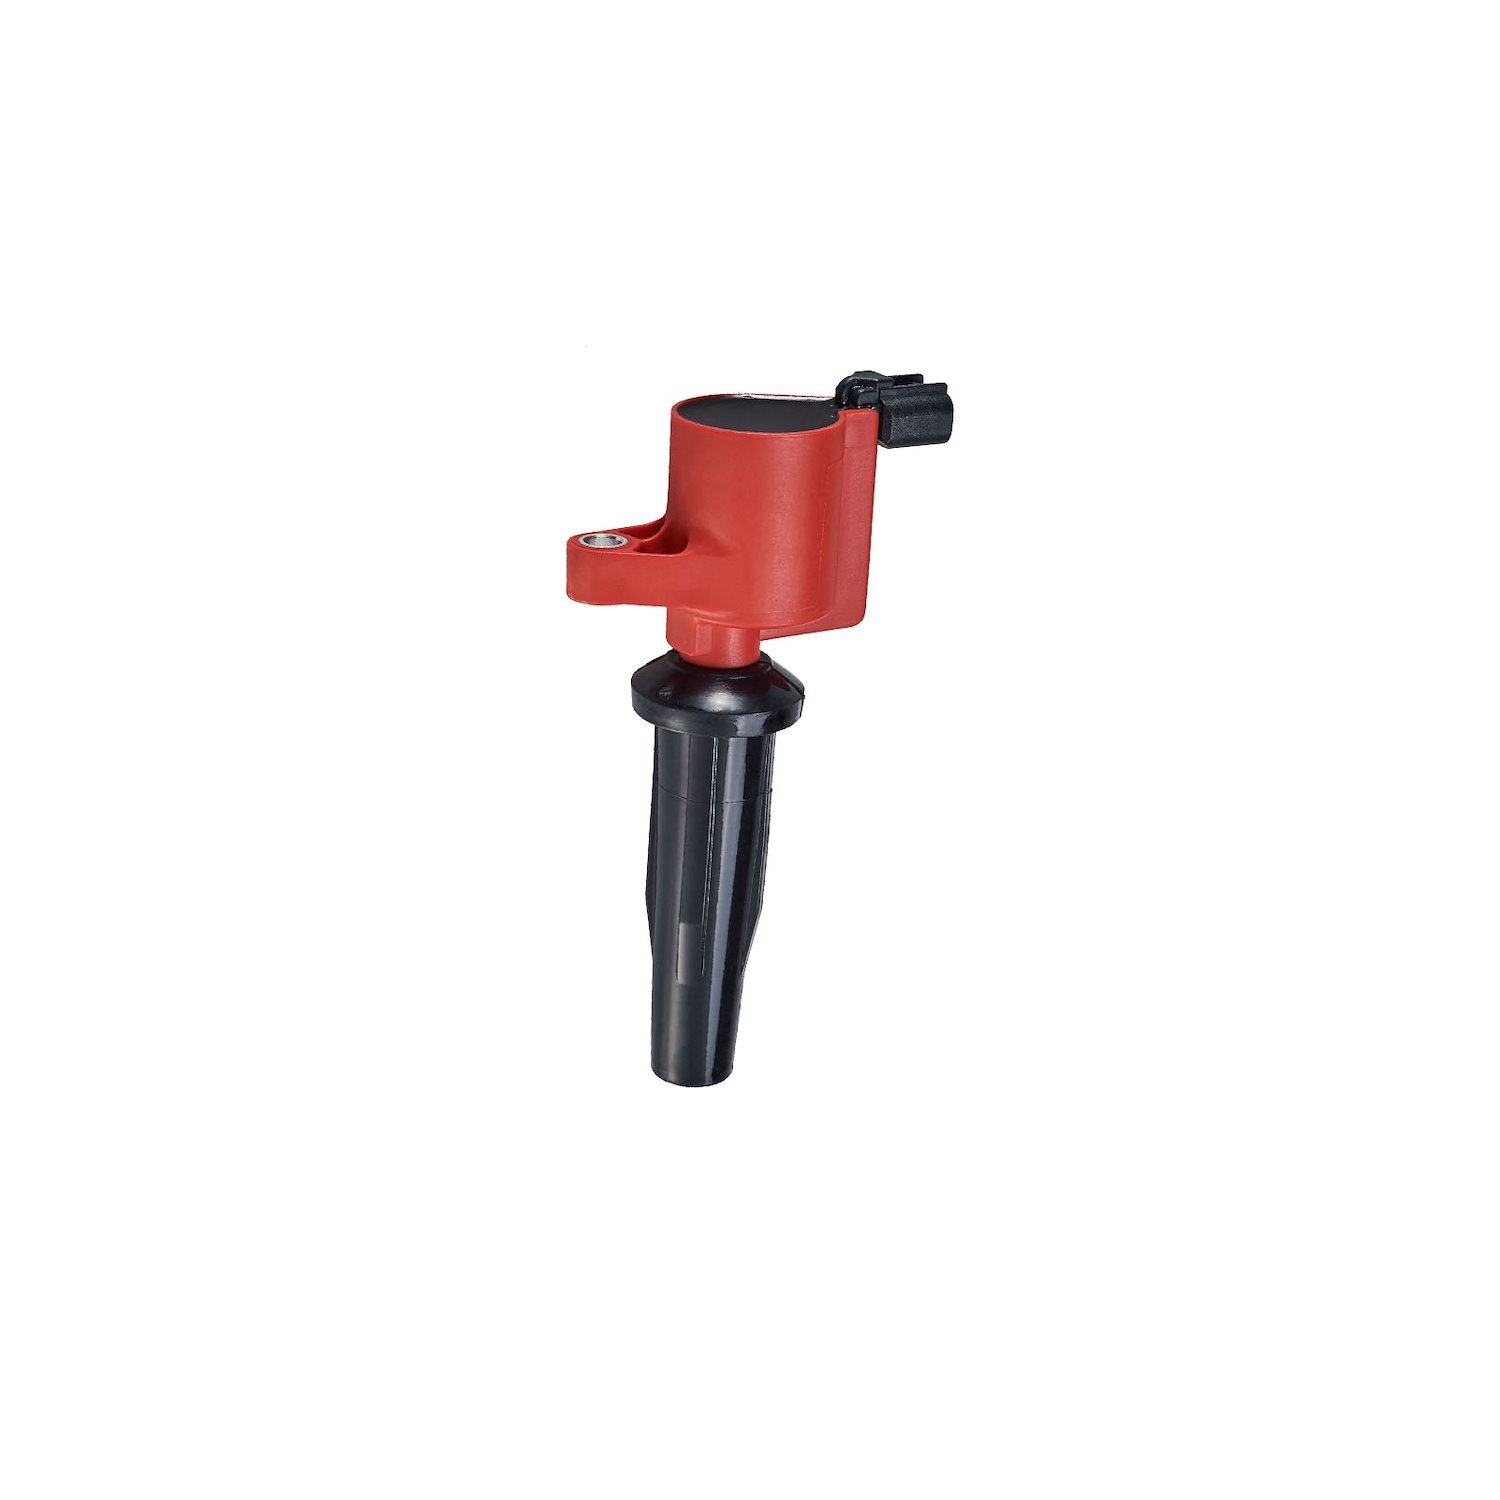 High-Performance Ignition Coil for Ford/Mazda Transit/Focus 2.0L/2.3L [Red]